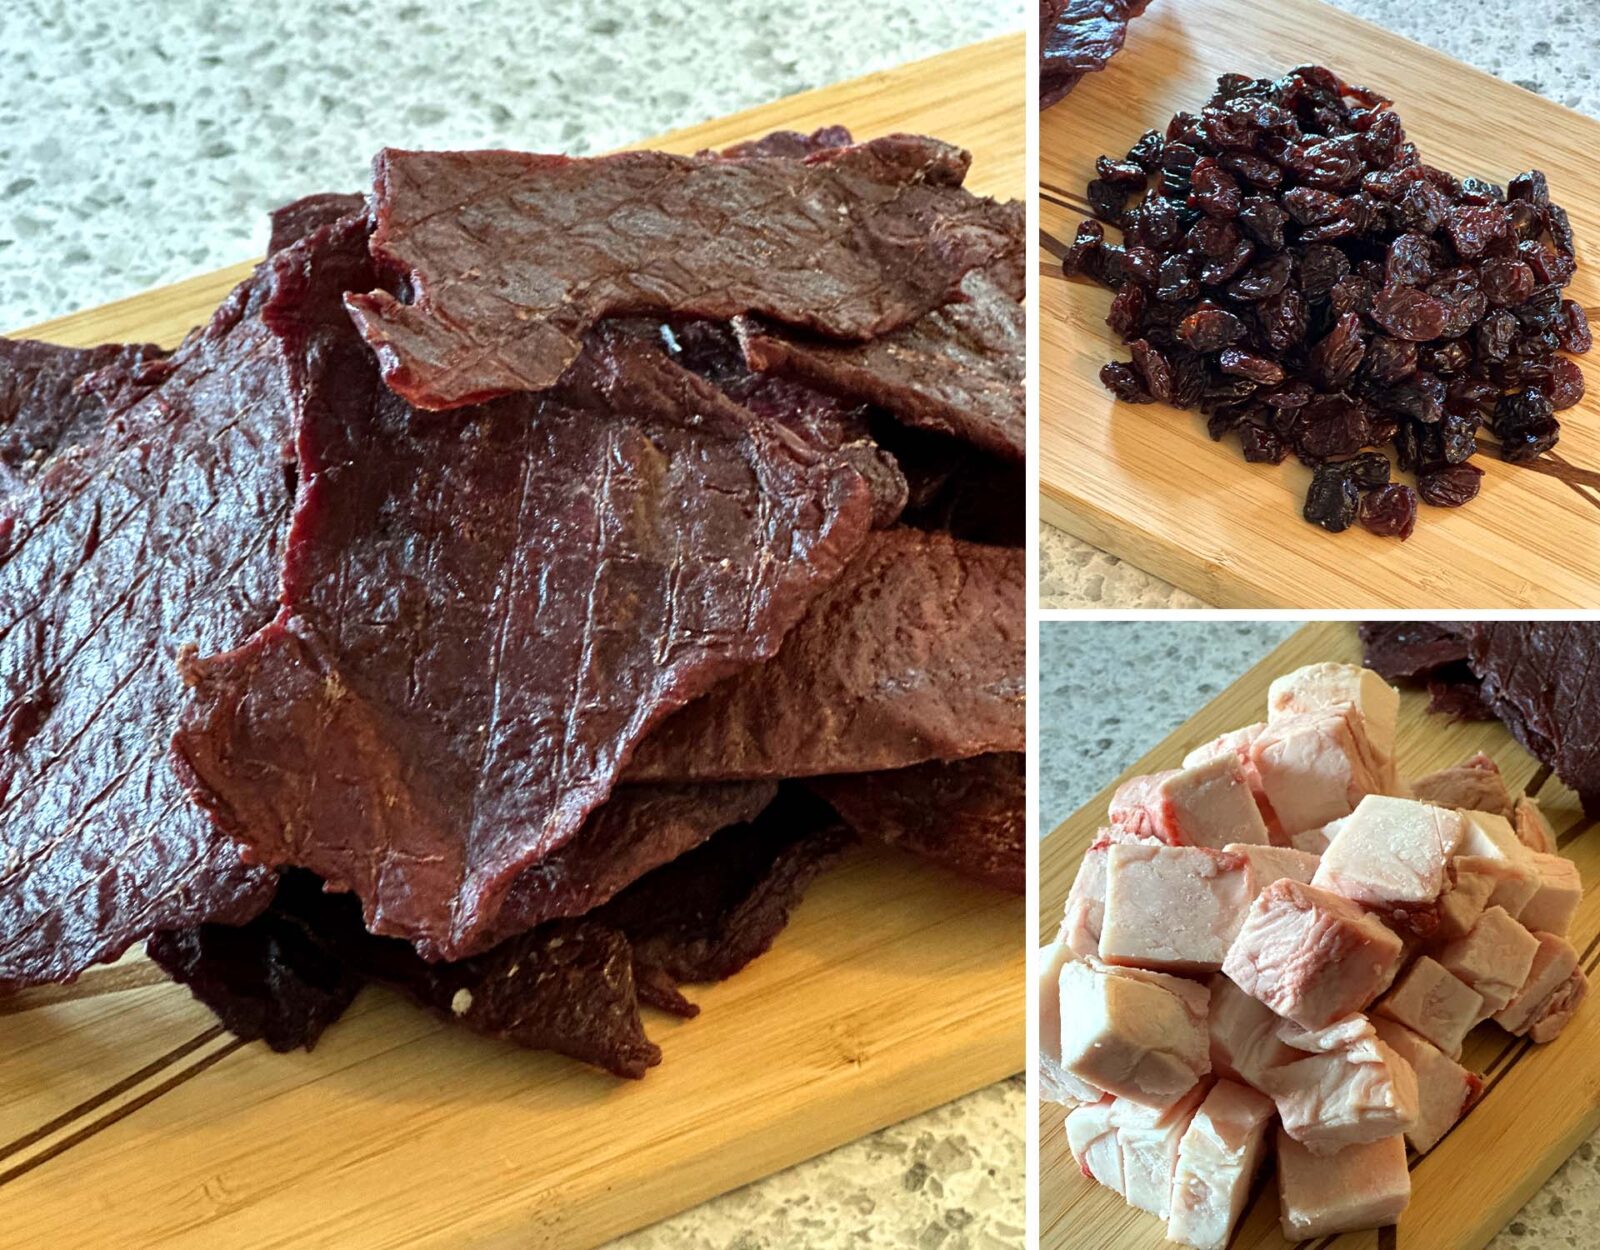 pemmican ingredients - jerkey, dried fruit and rendered fat